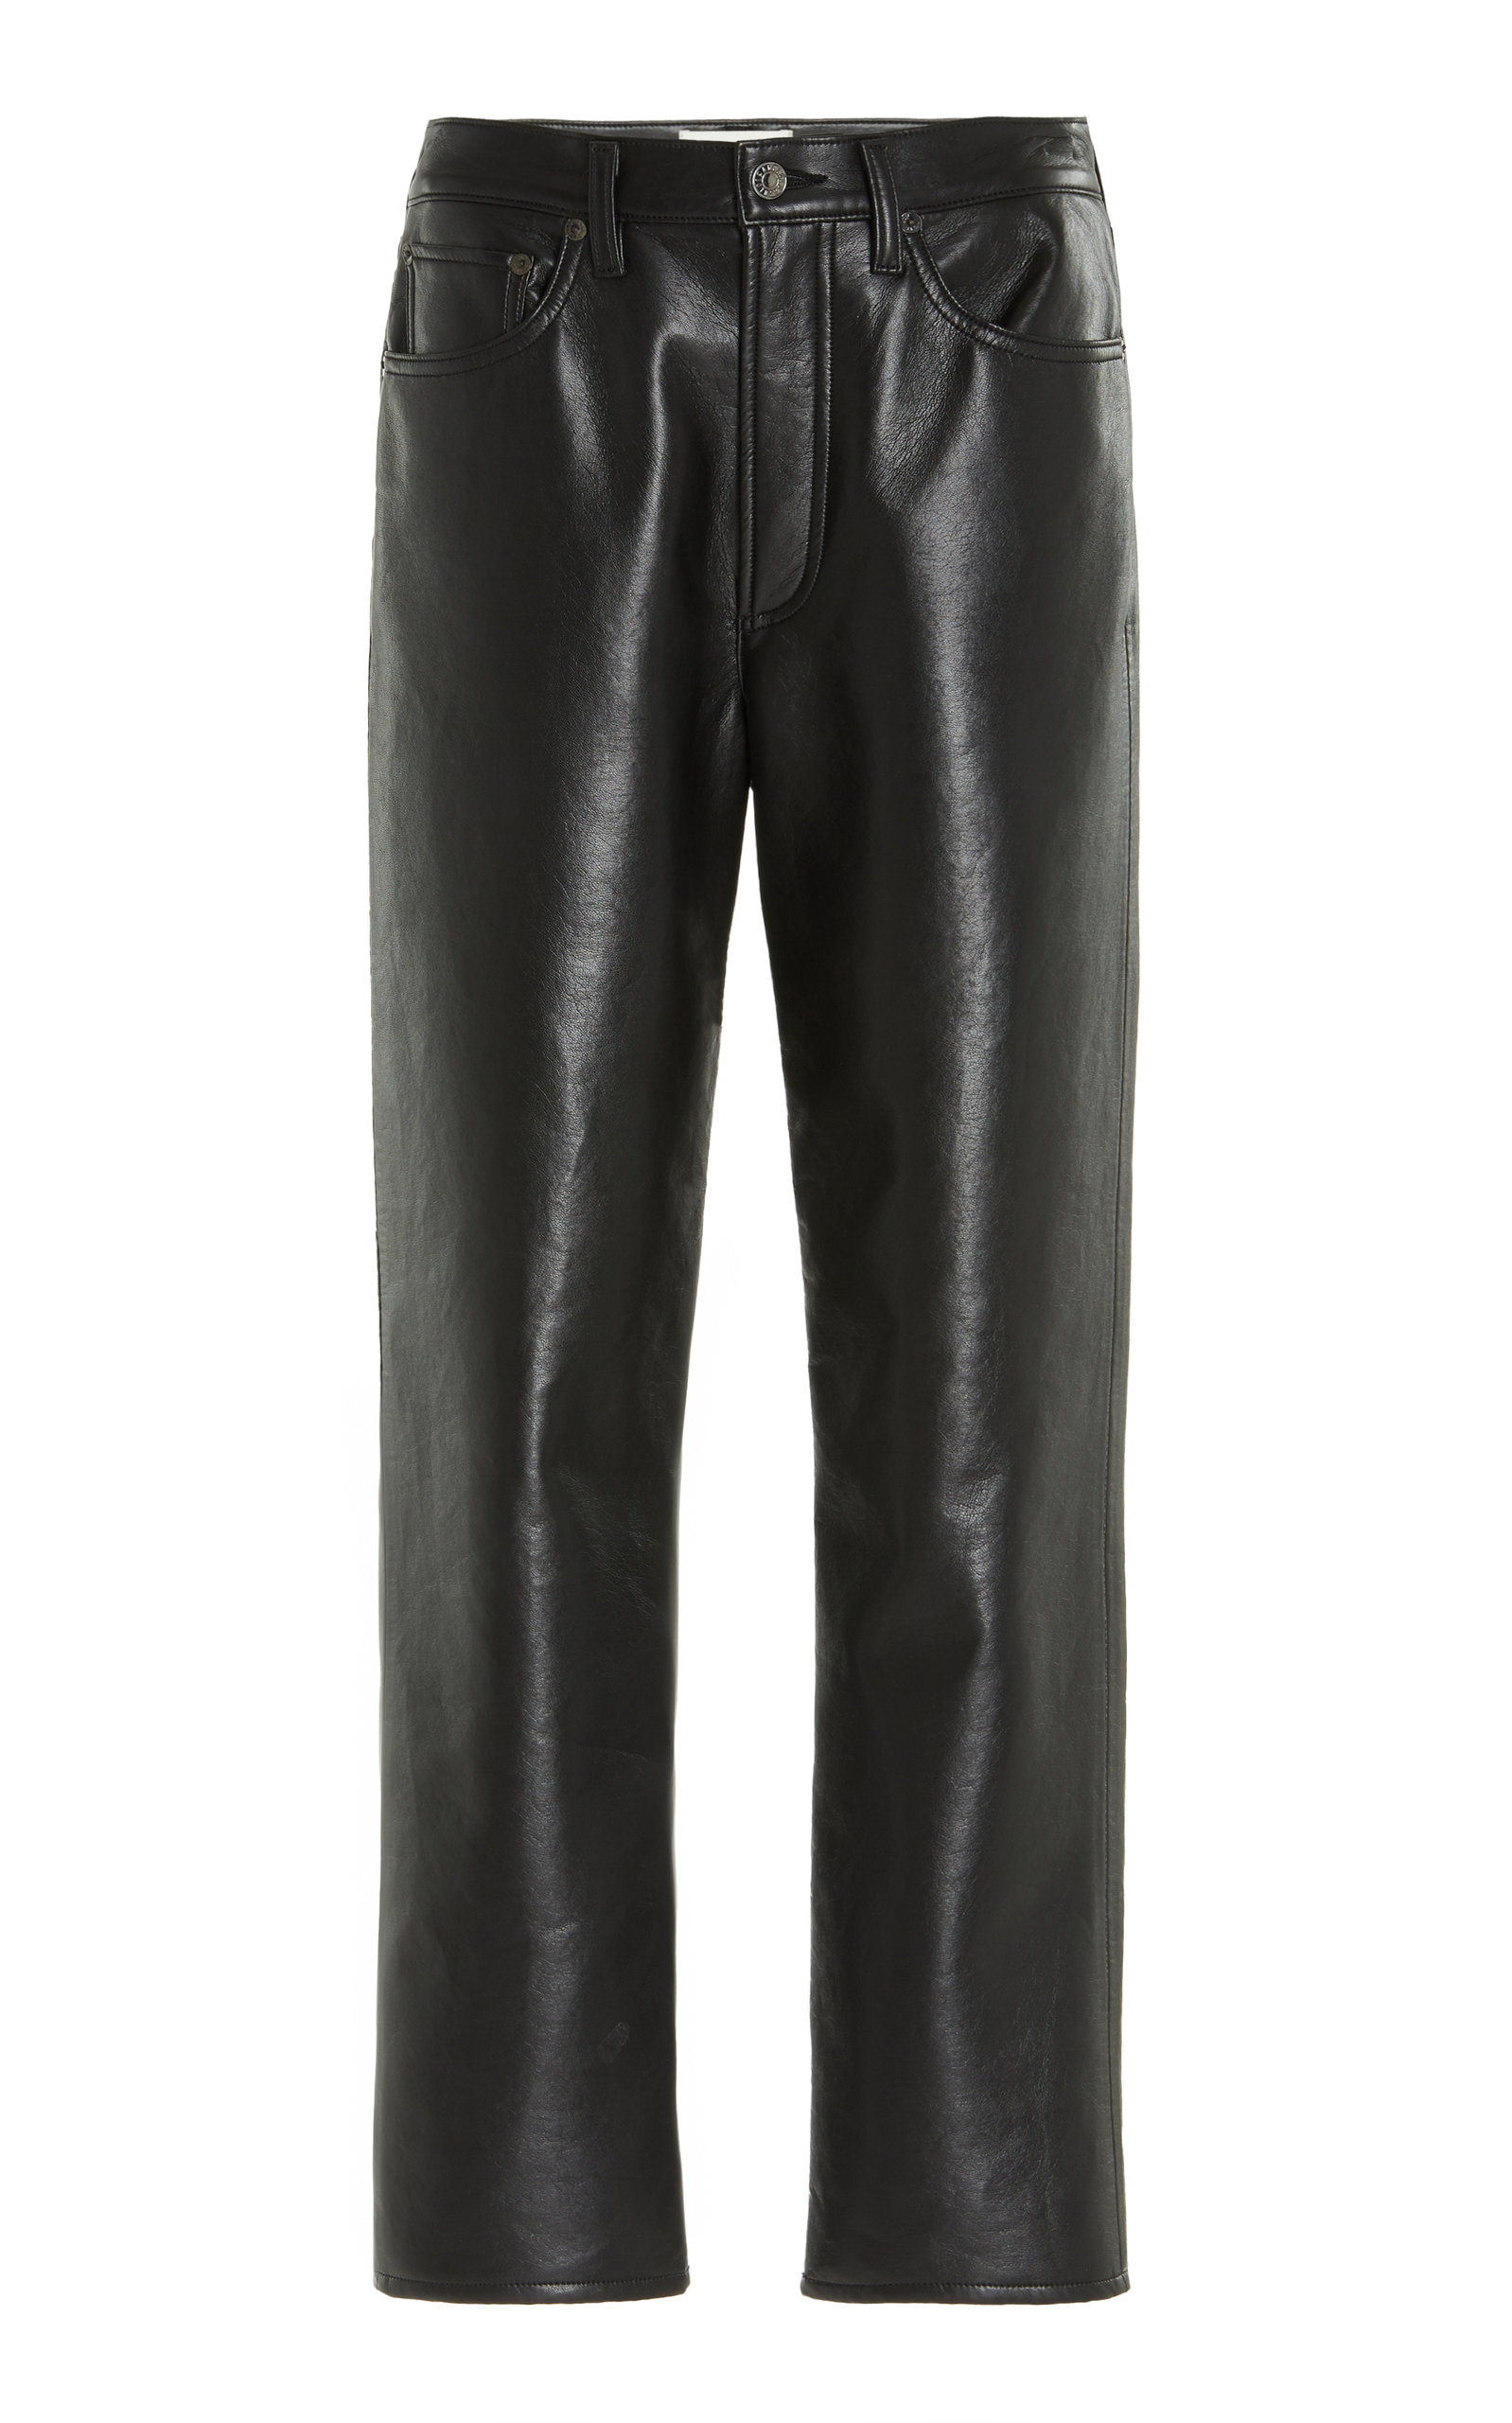 Agolde Women's 90's High-Rise Recycled Leather Straight-Leg Pants